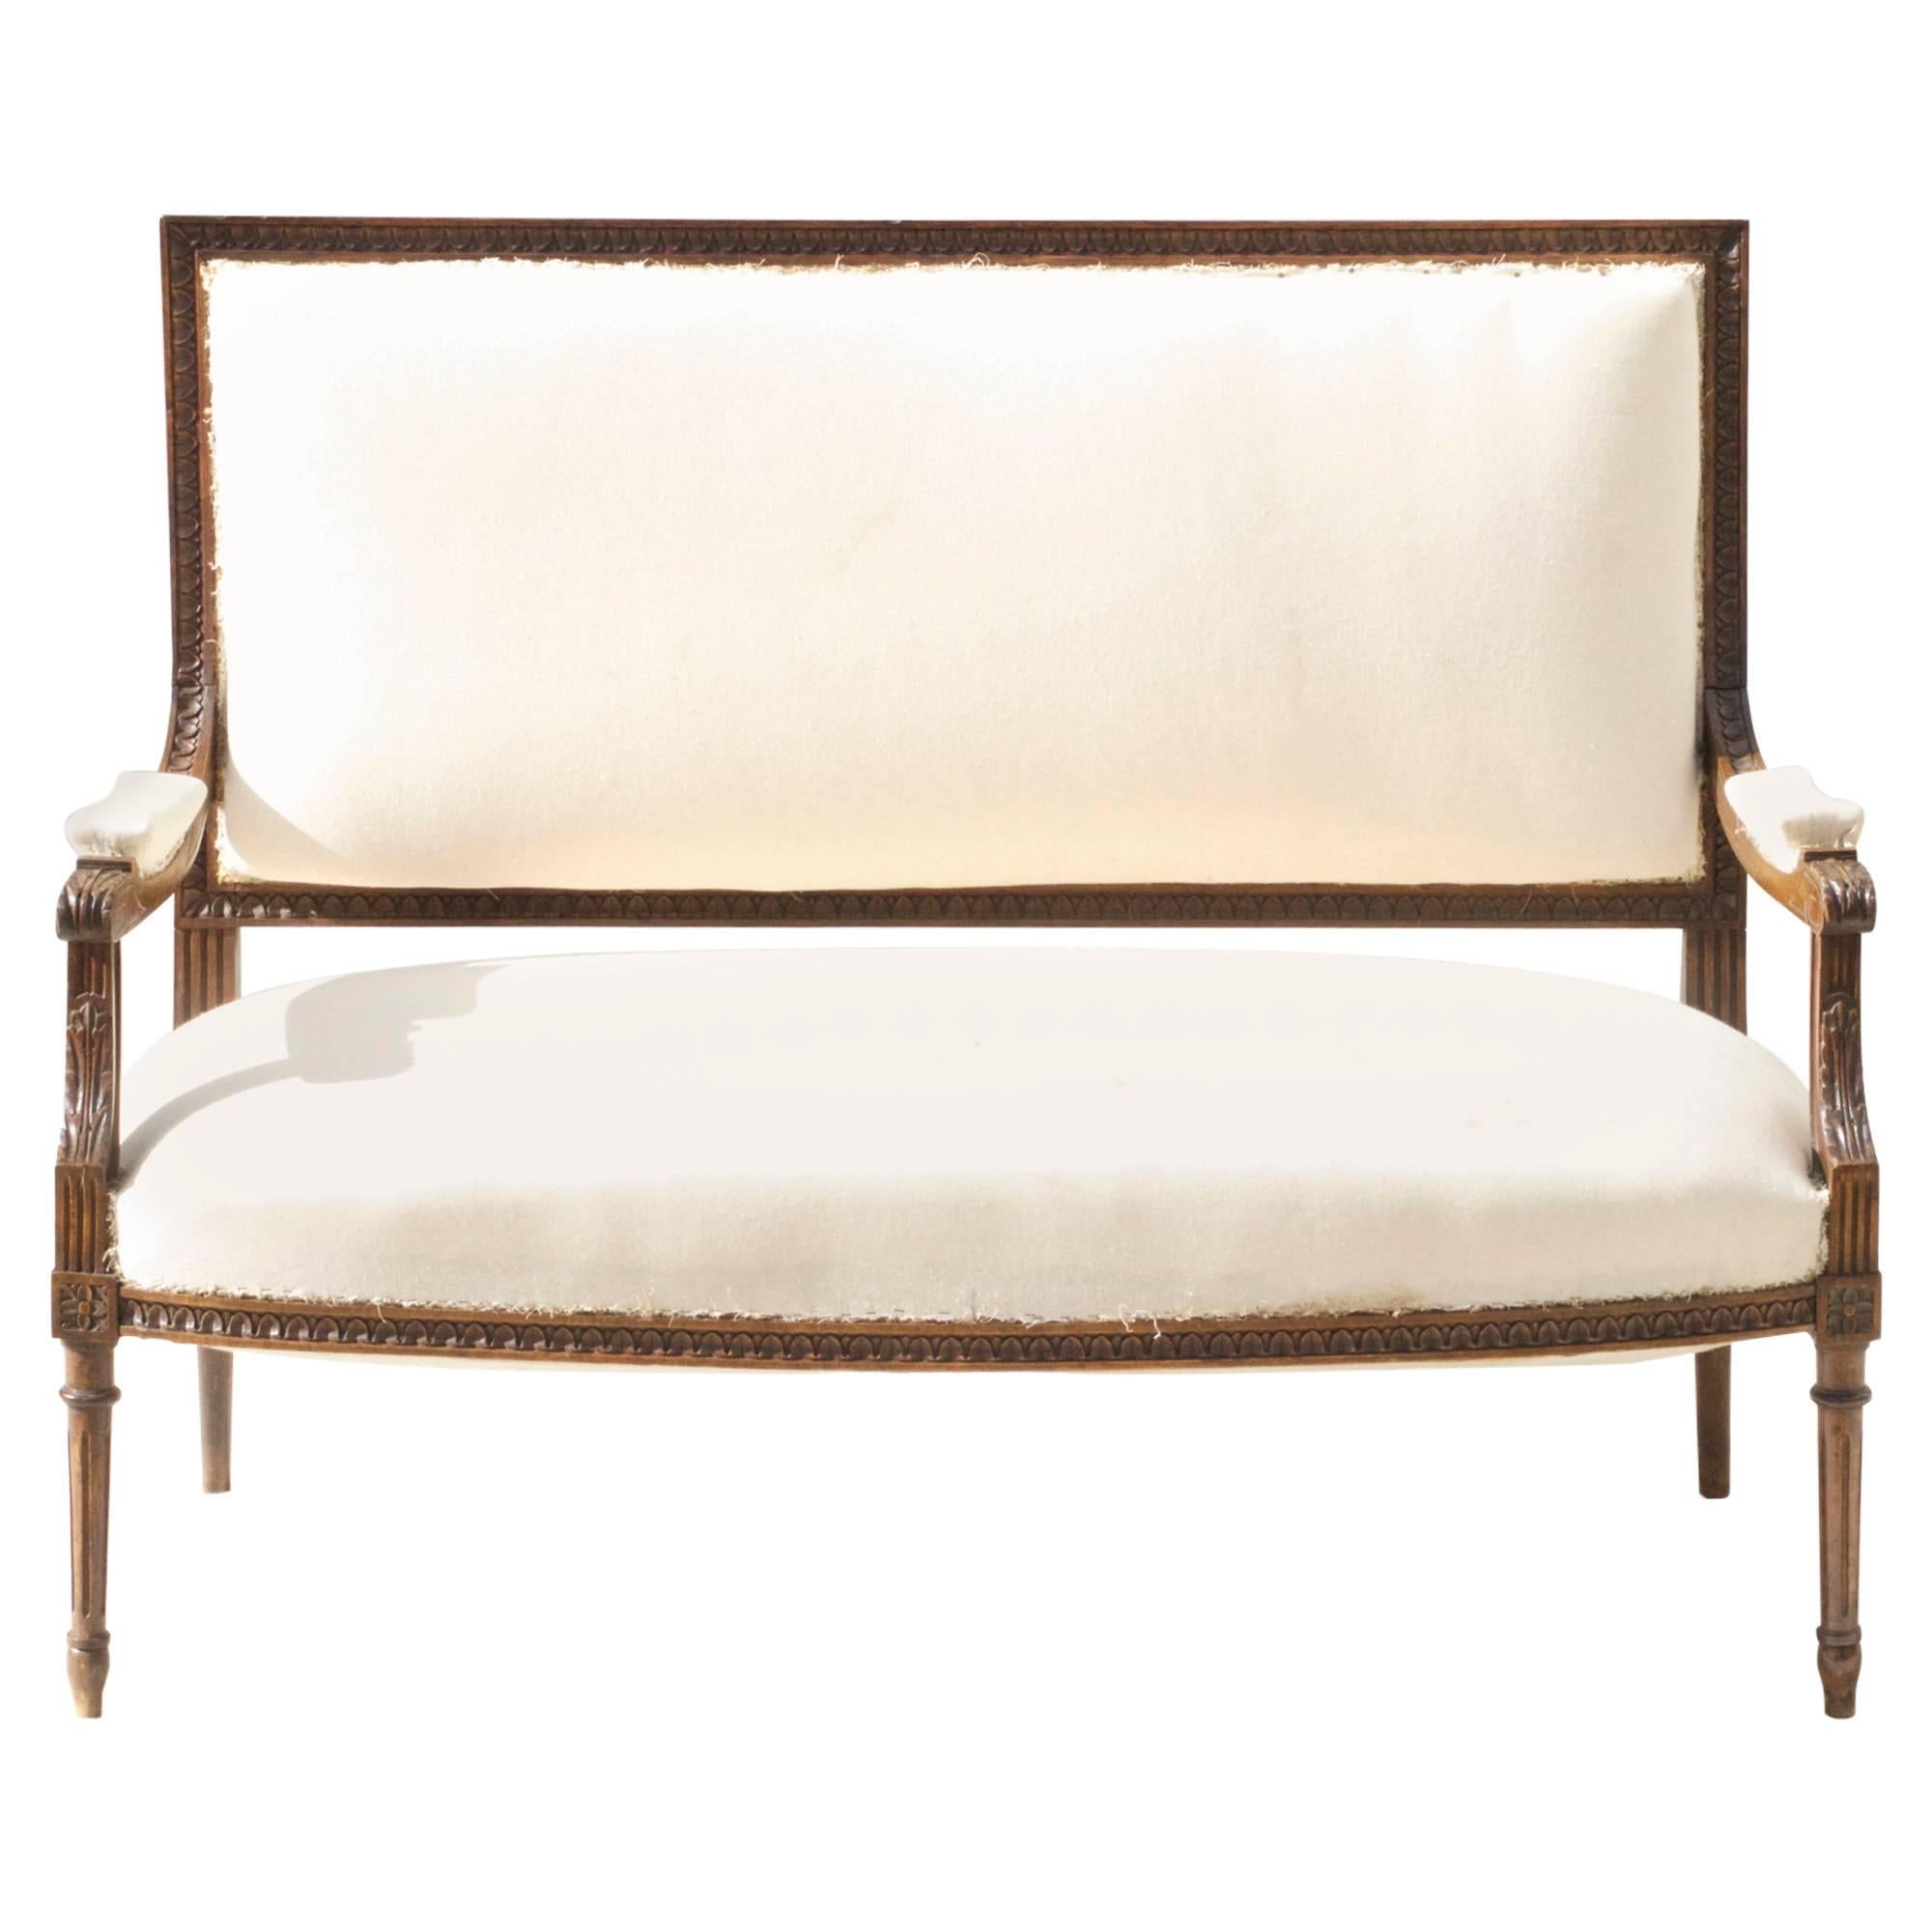 French Settee in the Louis XVI Taste